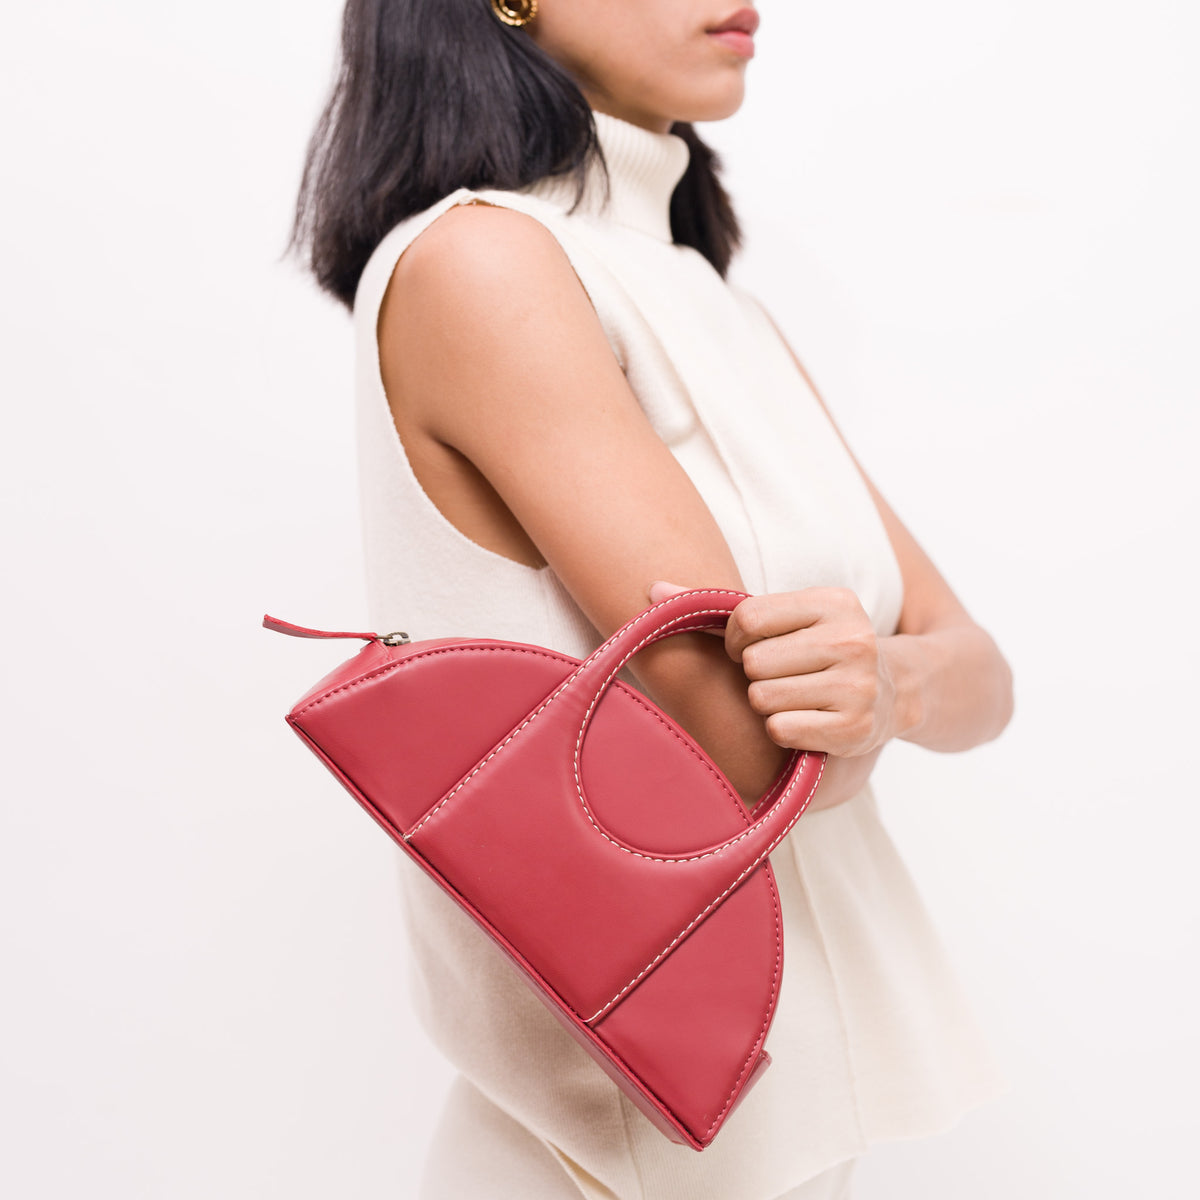 The OOO BAG - Cherry Red